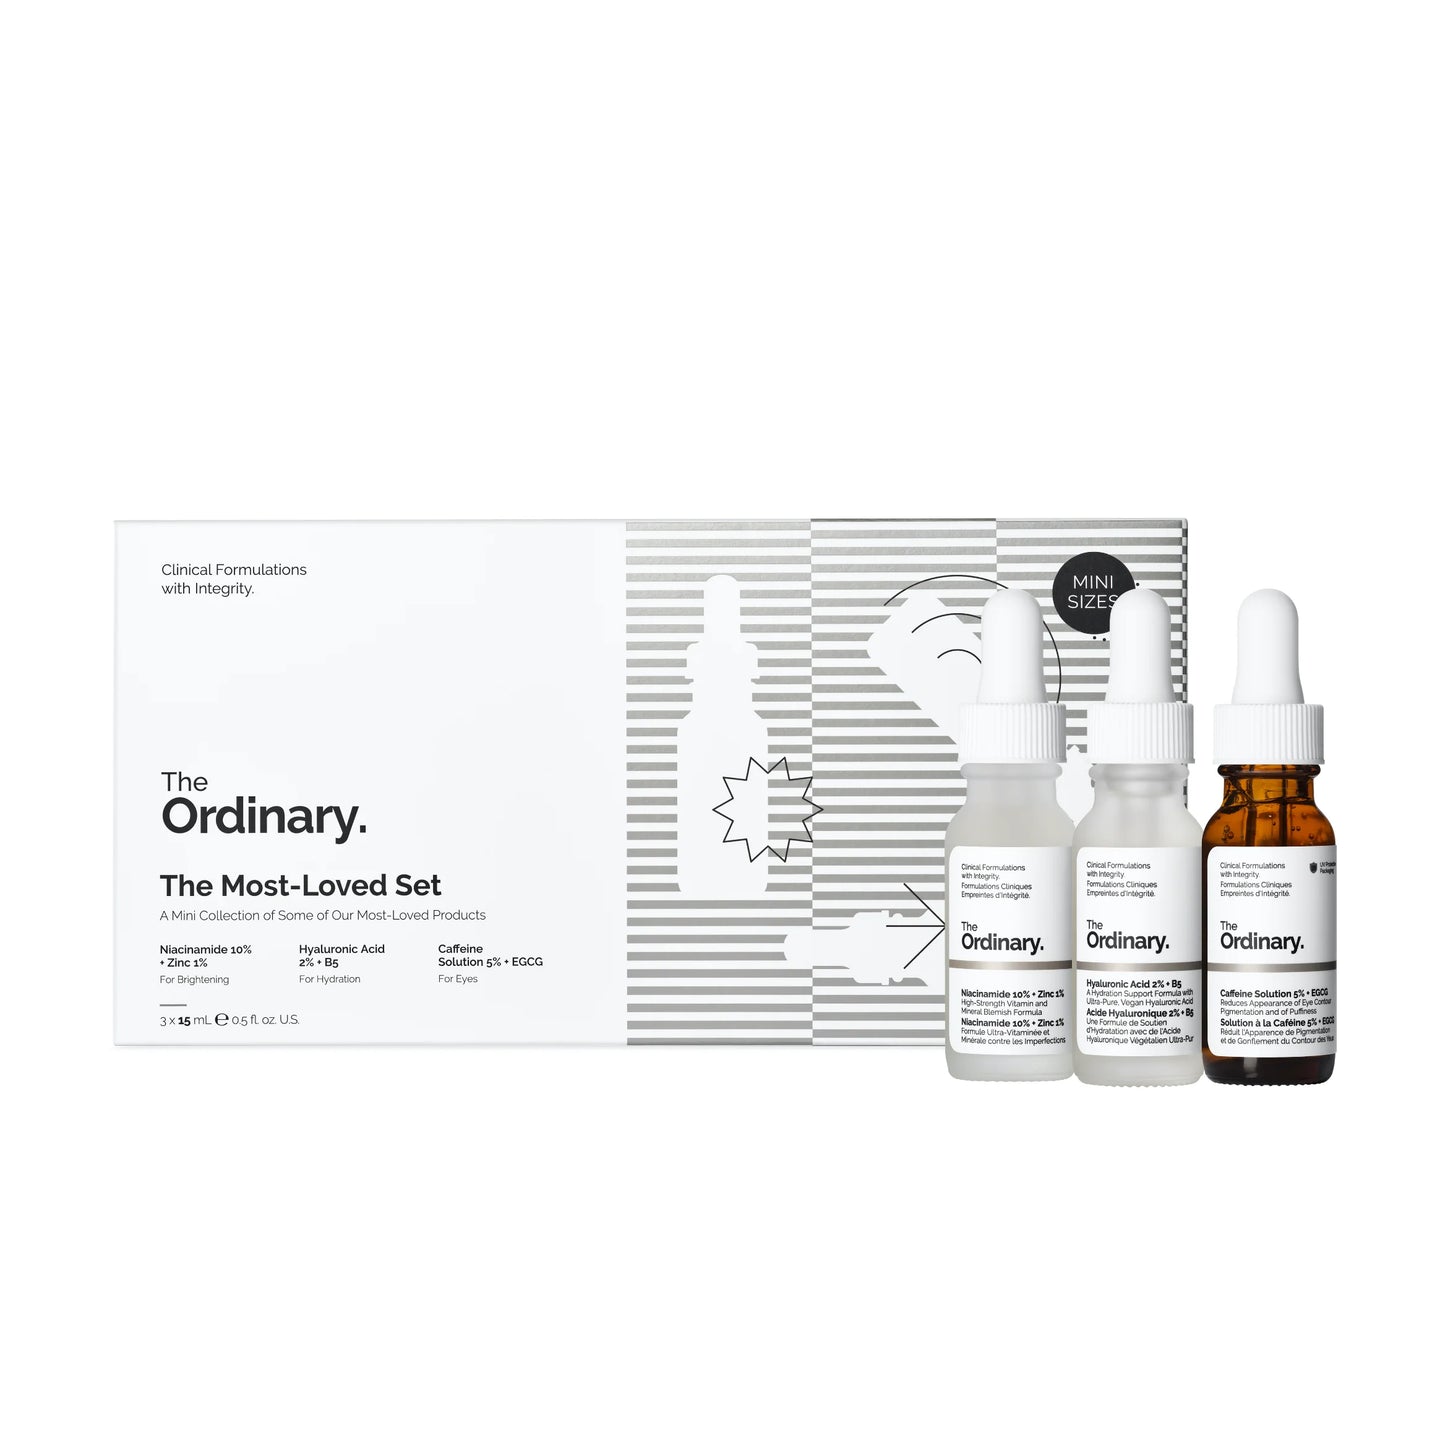 The Ordinary The Most-Loved Set Images